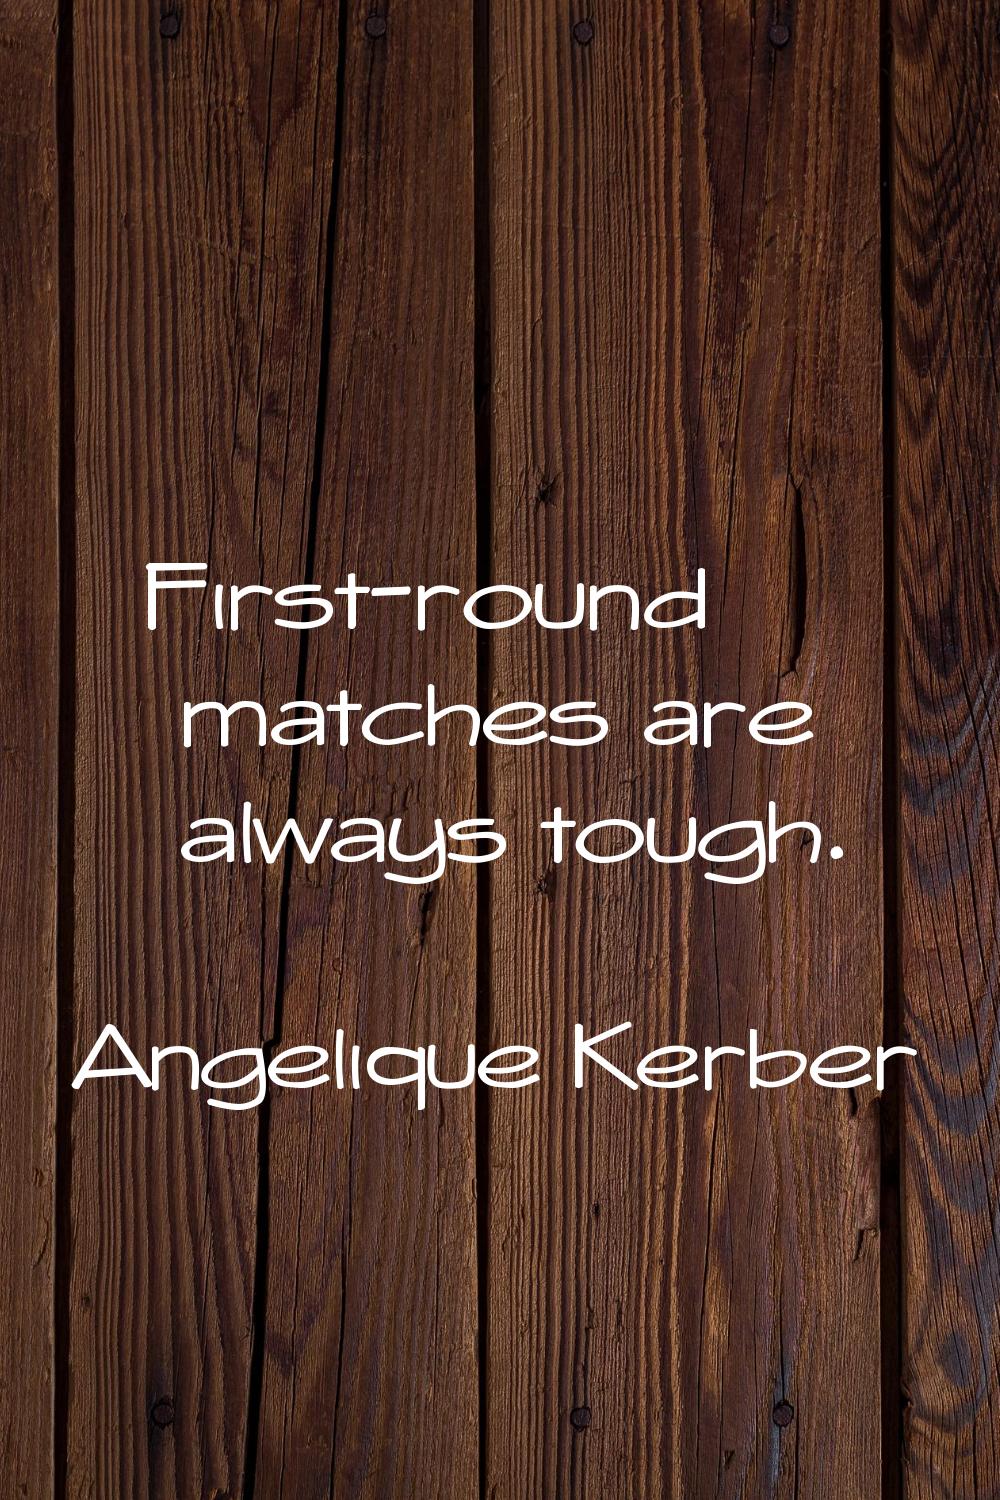 First-round matches are always tough.